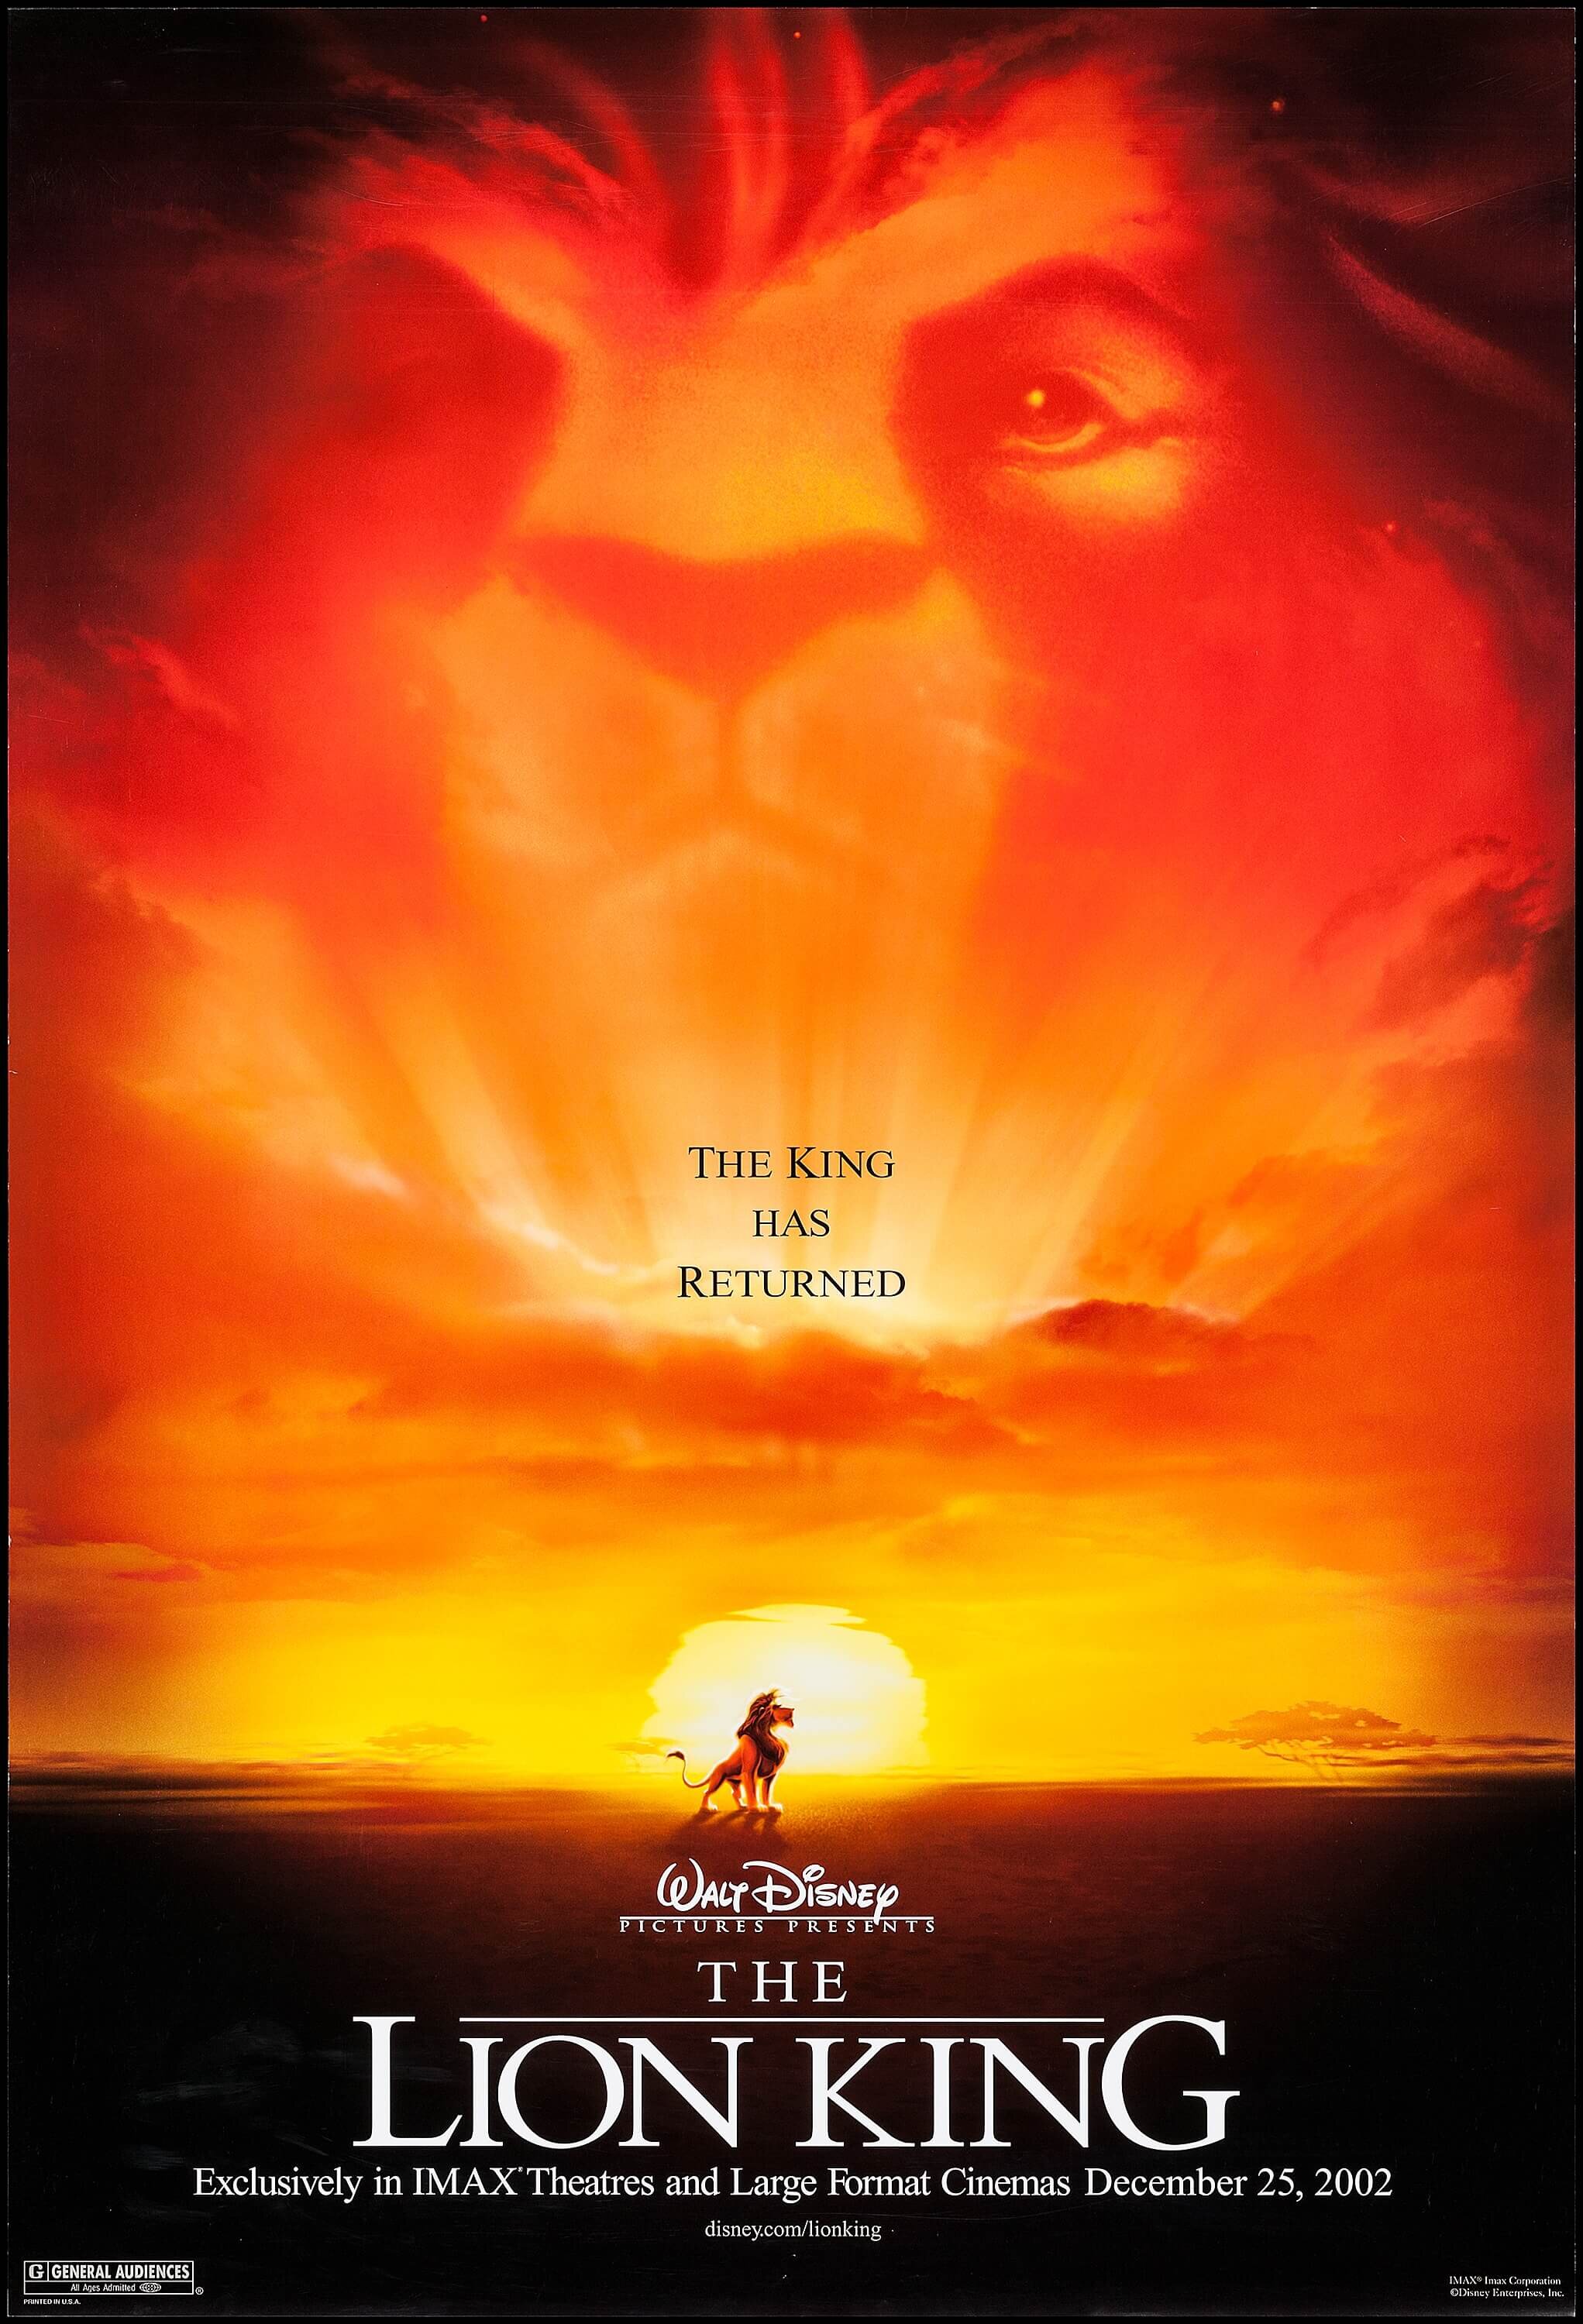 Double Side The Lion King Movie Poster 27x40 One Sheet **IMAX 2002 Walt Disney